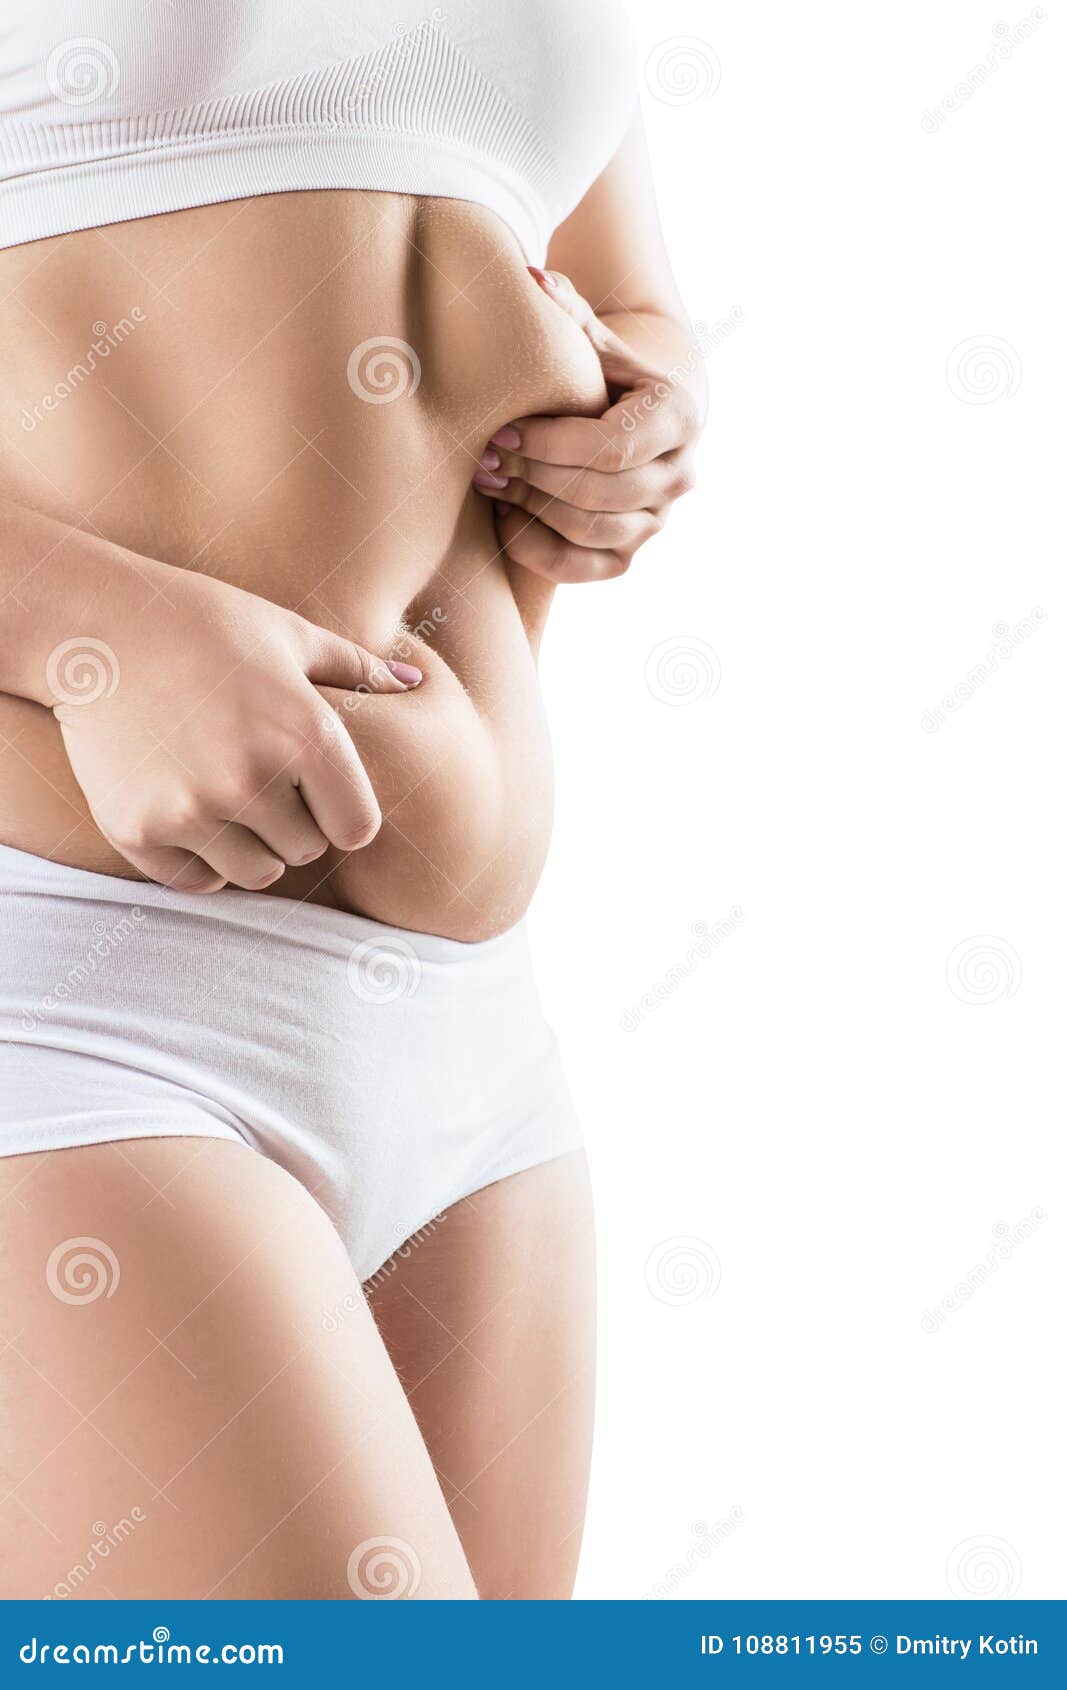 Woman in White Underwear Holds Belly Fat. Stock Image - Image of hands,  fitness: 108811955